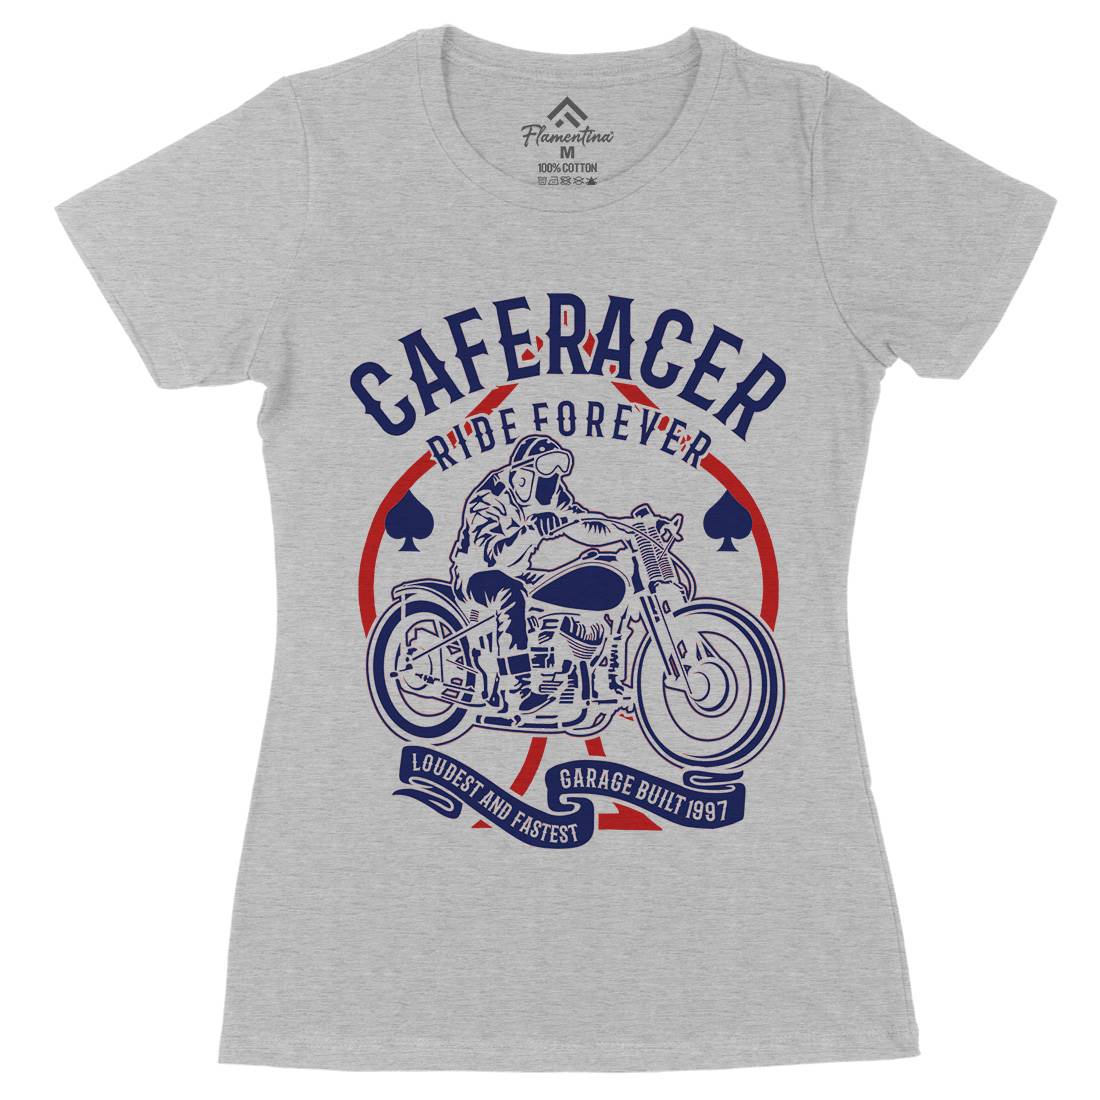 Caferacer Ride Forever Womens Organic Crew Neck T-Shirt Motorcycles B192